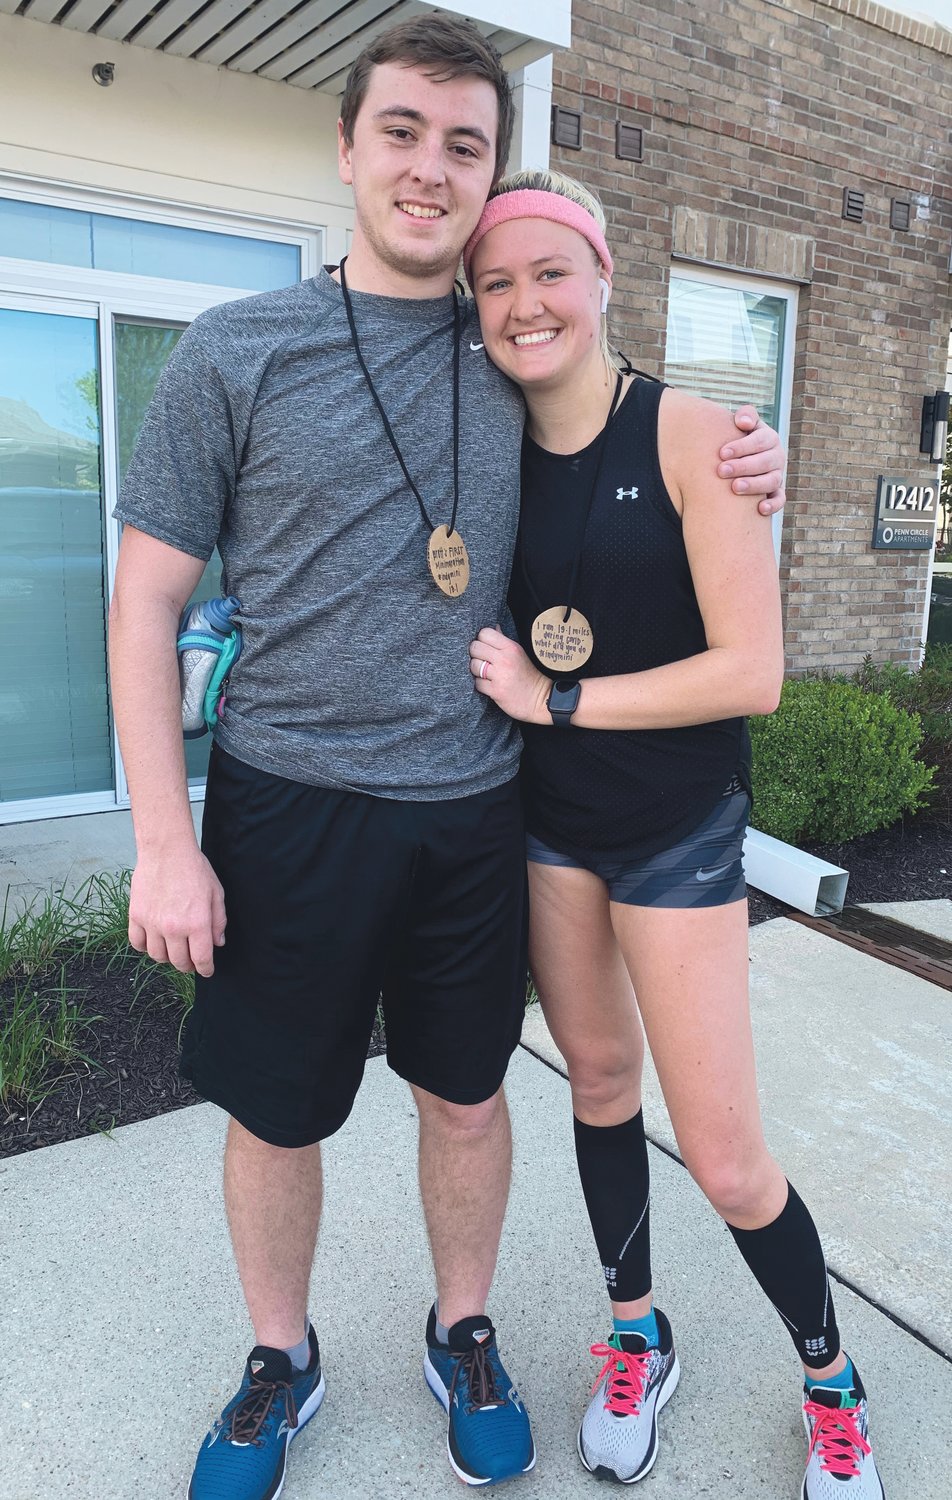 Over 30,000 people annually compete in the Indianapolis Mini Marathon, making it the largest half-marathon in the United States. The race traditionally kicks off the month of May as an official 500 festival event, but due to the COVID-19 pandemic, many runners took to a virtual race in 2020.Crawfordsville native Brett Warren and his wife, Korey, finished their virtual Mini Marathon in Carmel on Saturday. It was Brett’s first half-marathon, while Korey is a regular competitor.